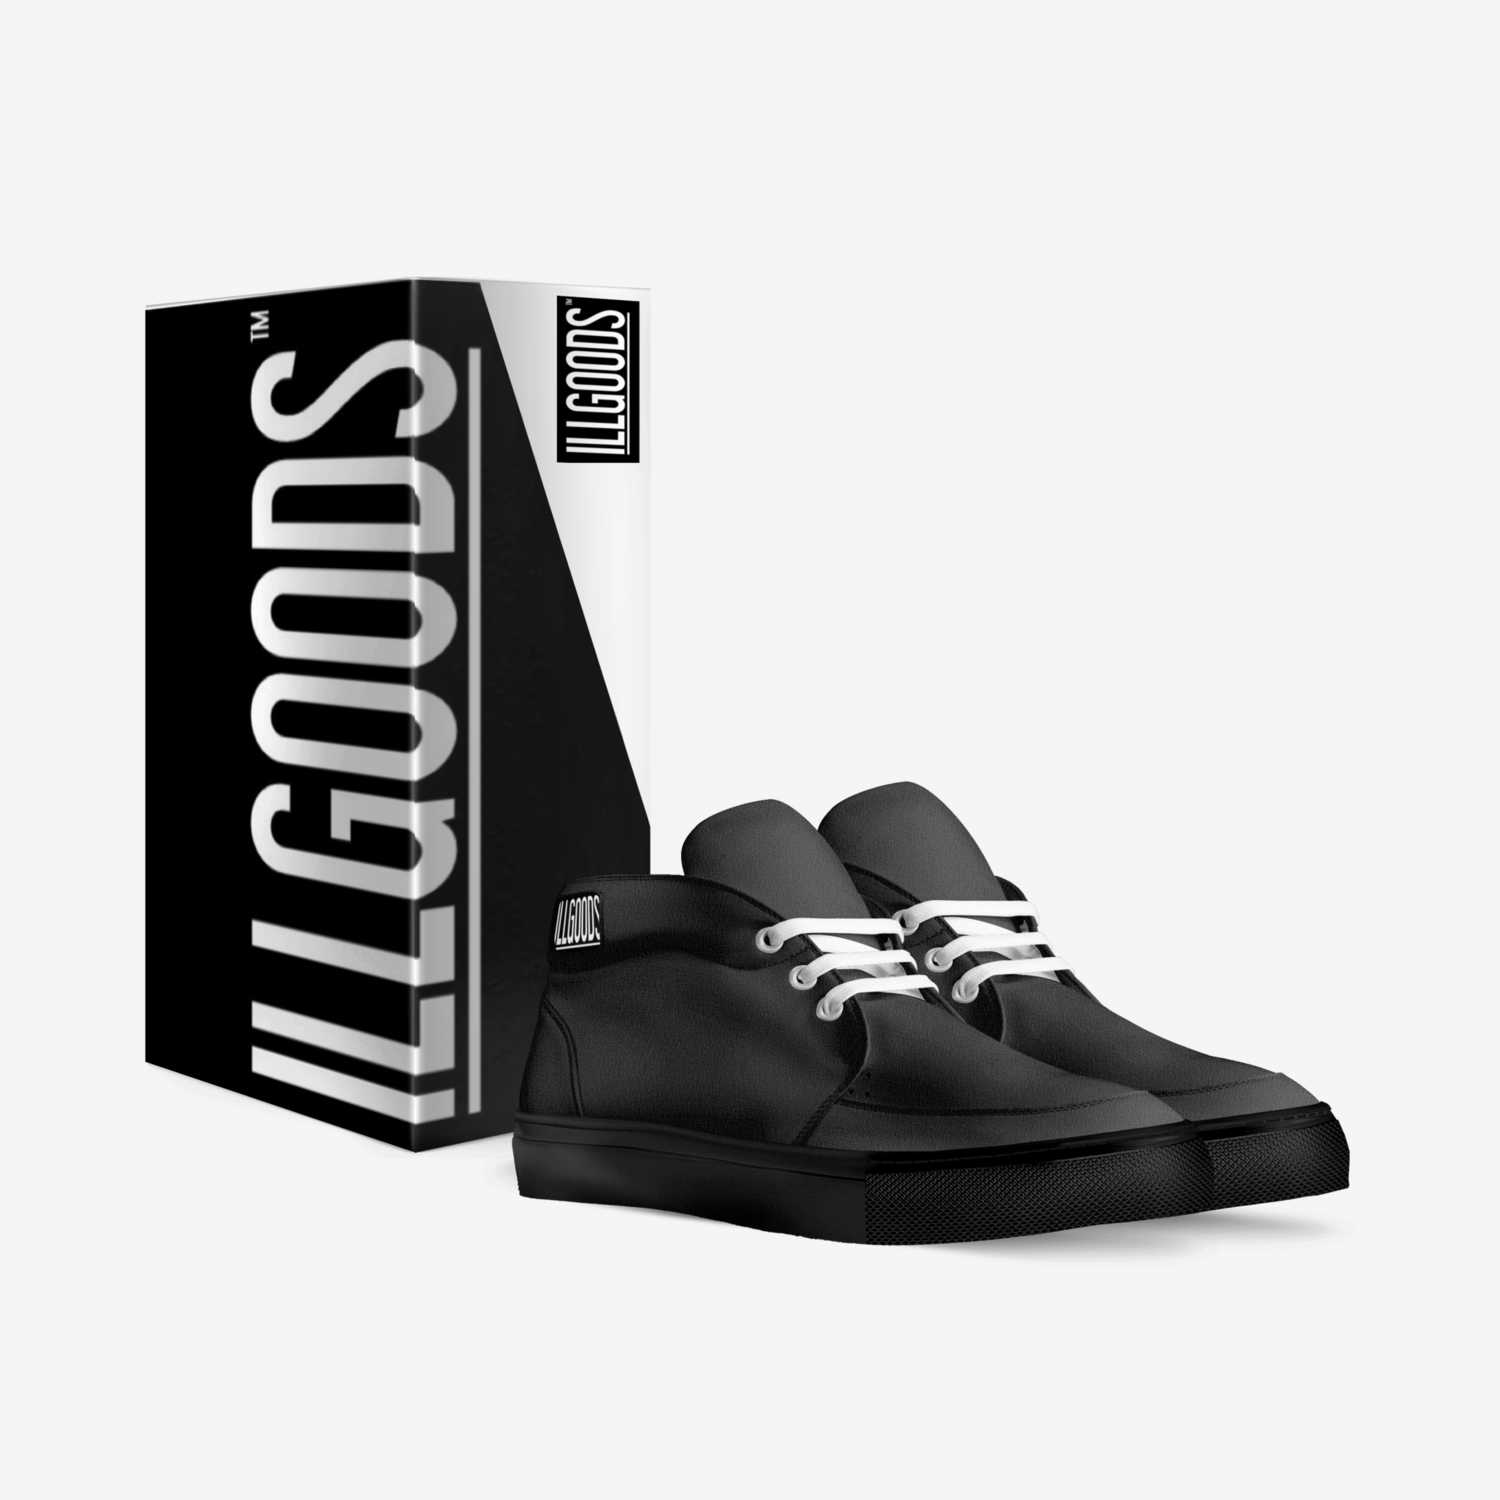 ILLGOODS  custom made in Italy shoes by Λge | Box view